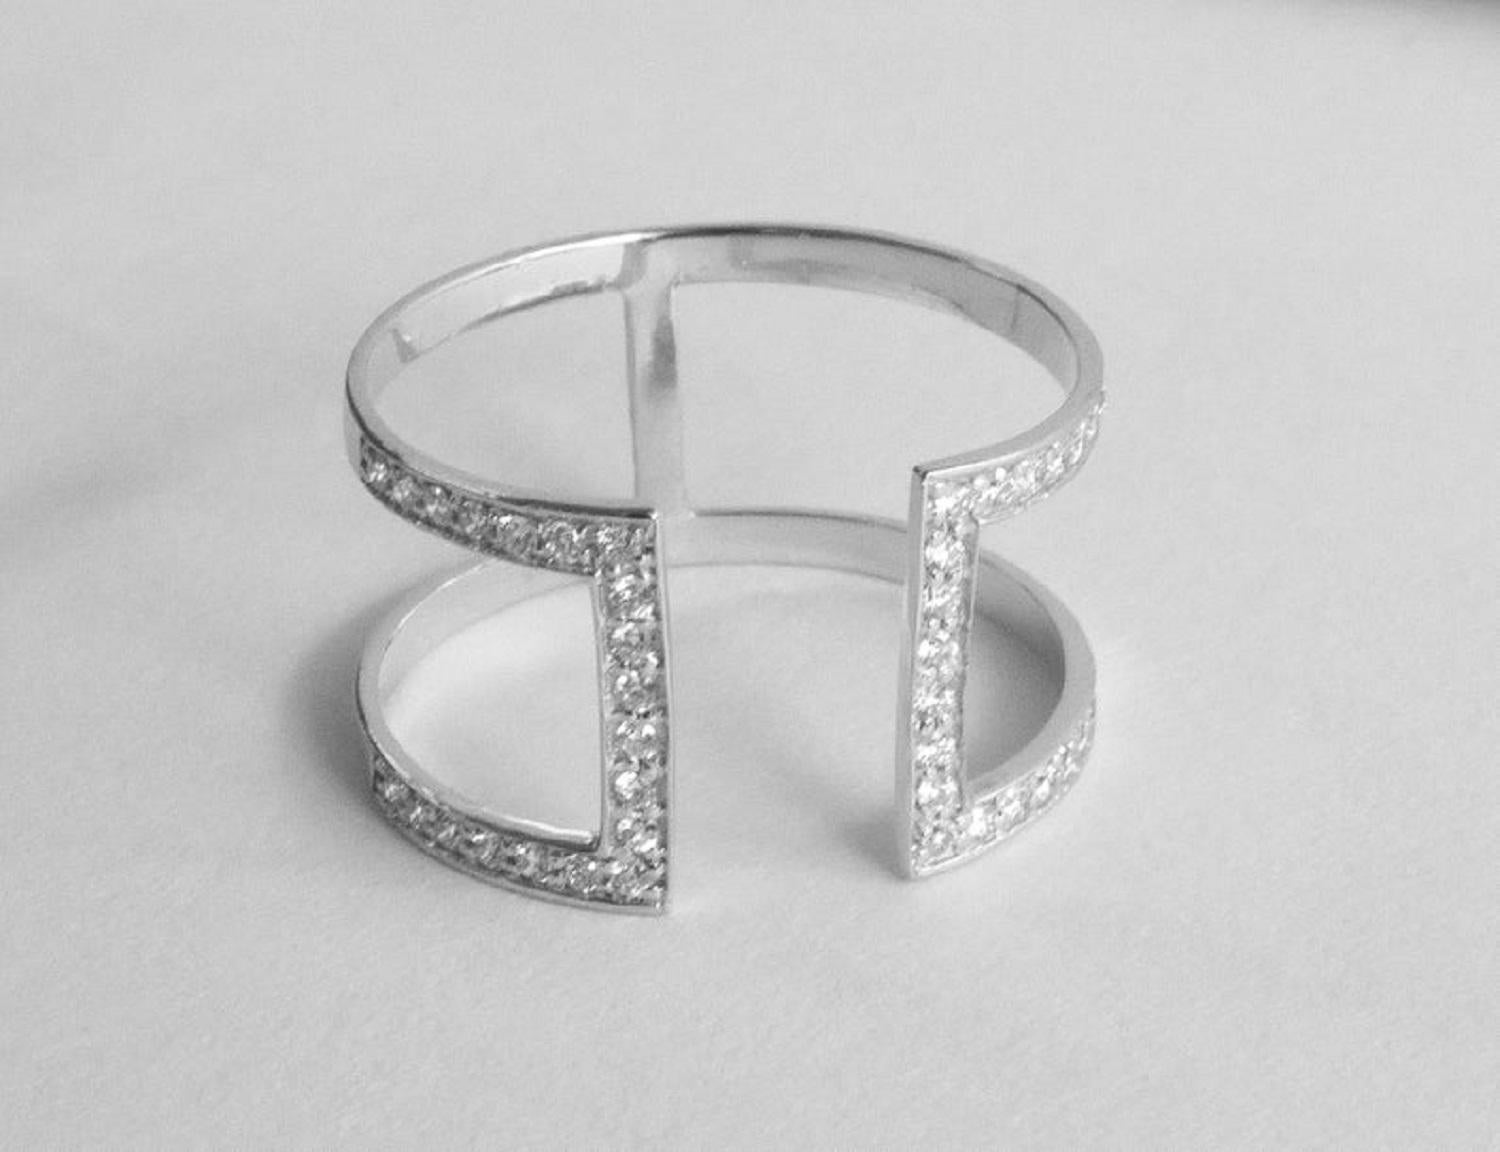 For Sale:  18k Gold Double Row Diamond Ring Two Band Ring Parallel Open Bar Diamond 4